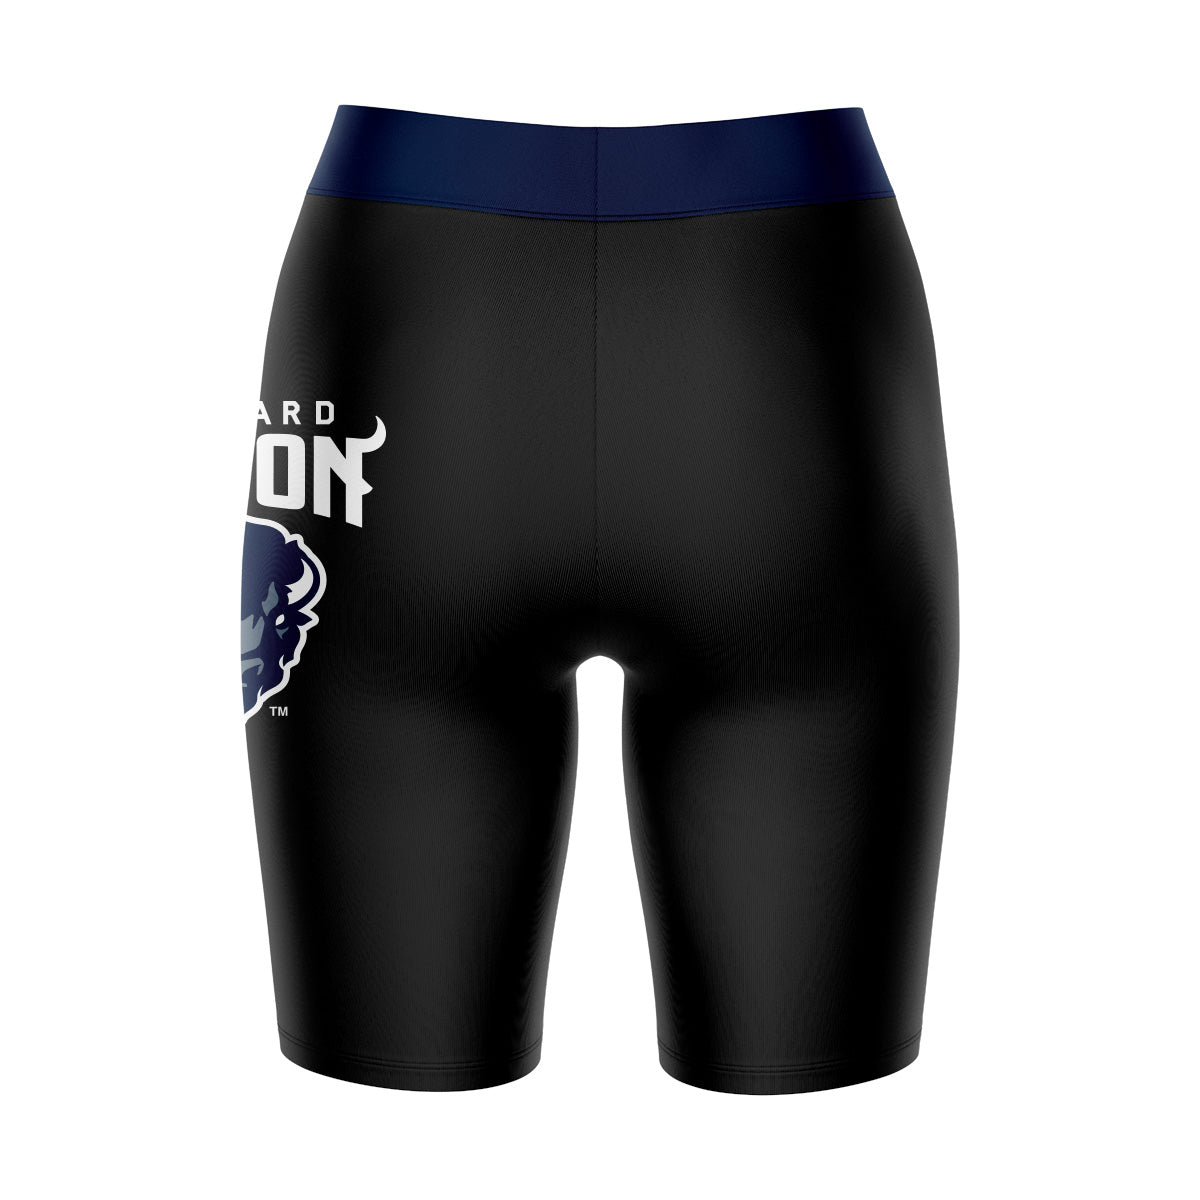 Howard Bison Vive La Fete Game Day Logo on Thigh and Waistband Black and Navy Women Bike Short 9 Inseam"